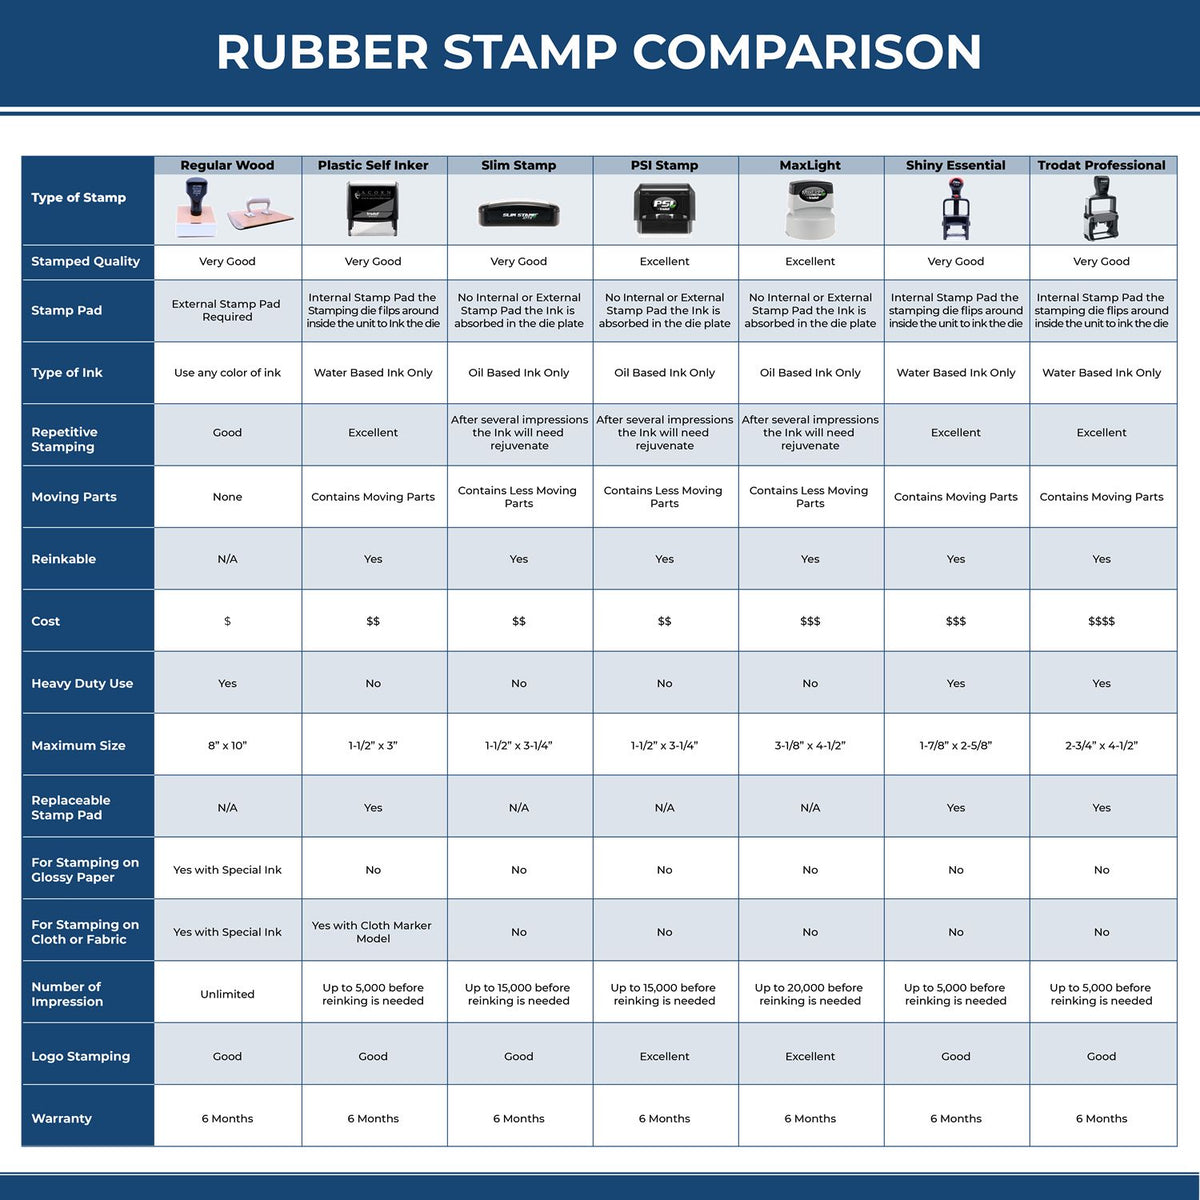 Large This Envelop has been Sealed Rubber Stamp 4993R Rubber Stamp Comparison